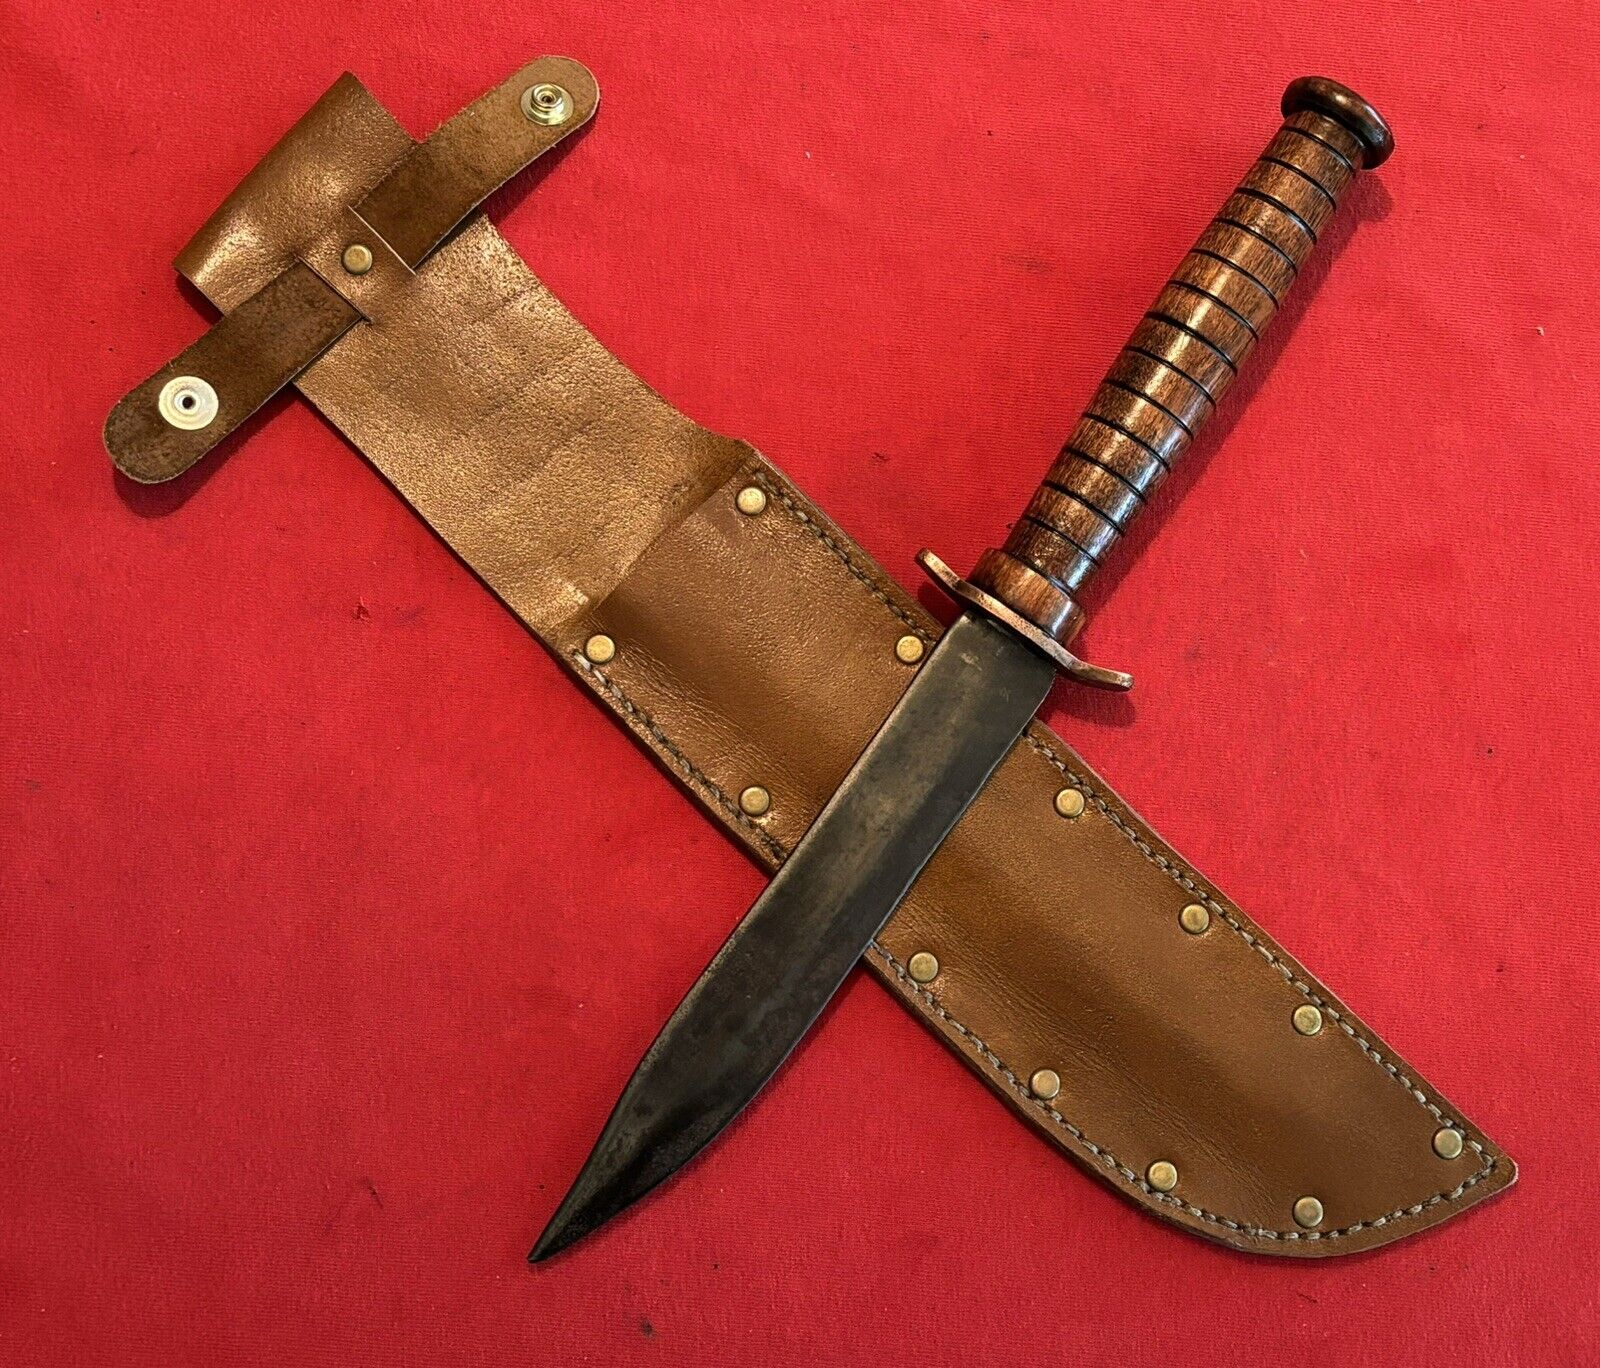 VINTAGE SWORD BLADE WITH NEW WOOD TURNED HANDLE & LEATHER SHEATH